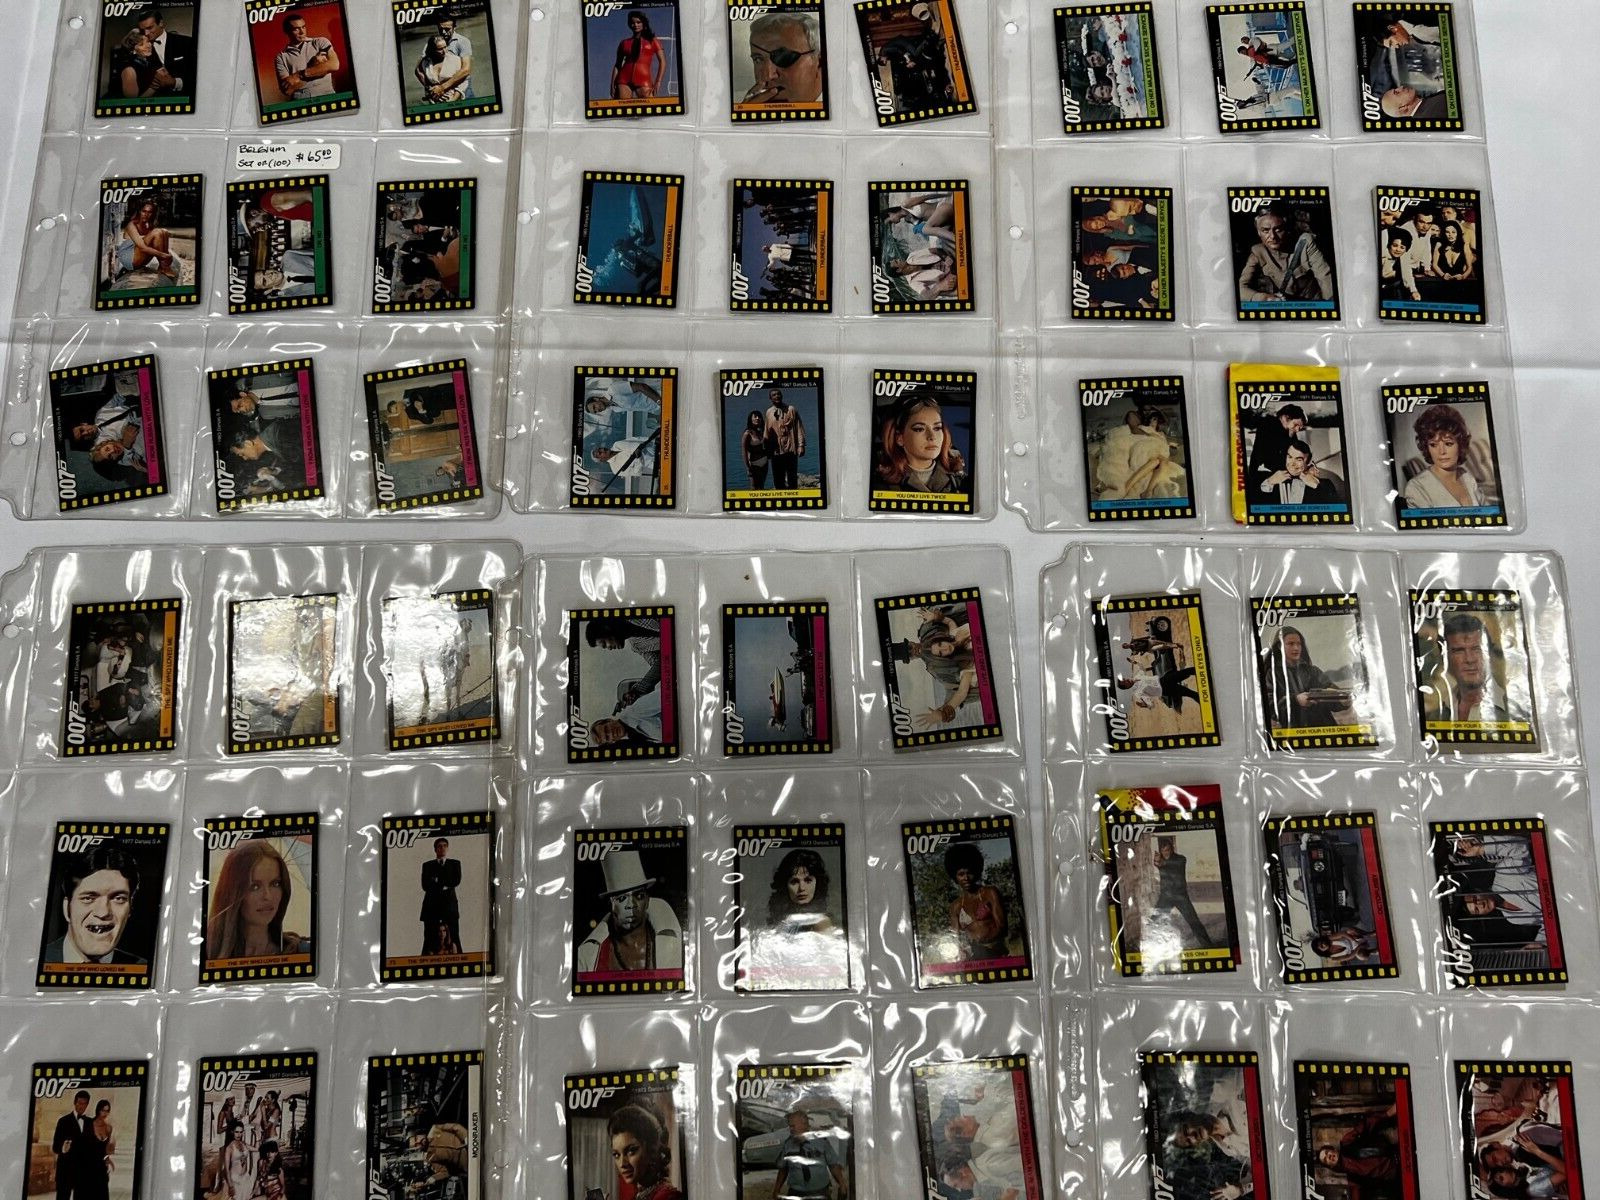 007 James Bond vintage collection of 100 Belgian trading cards 2x3 inches